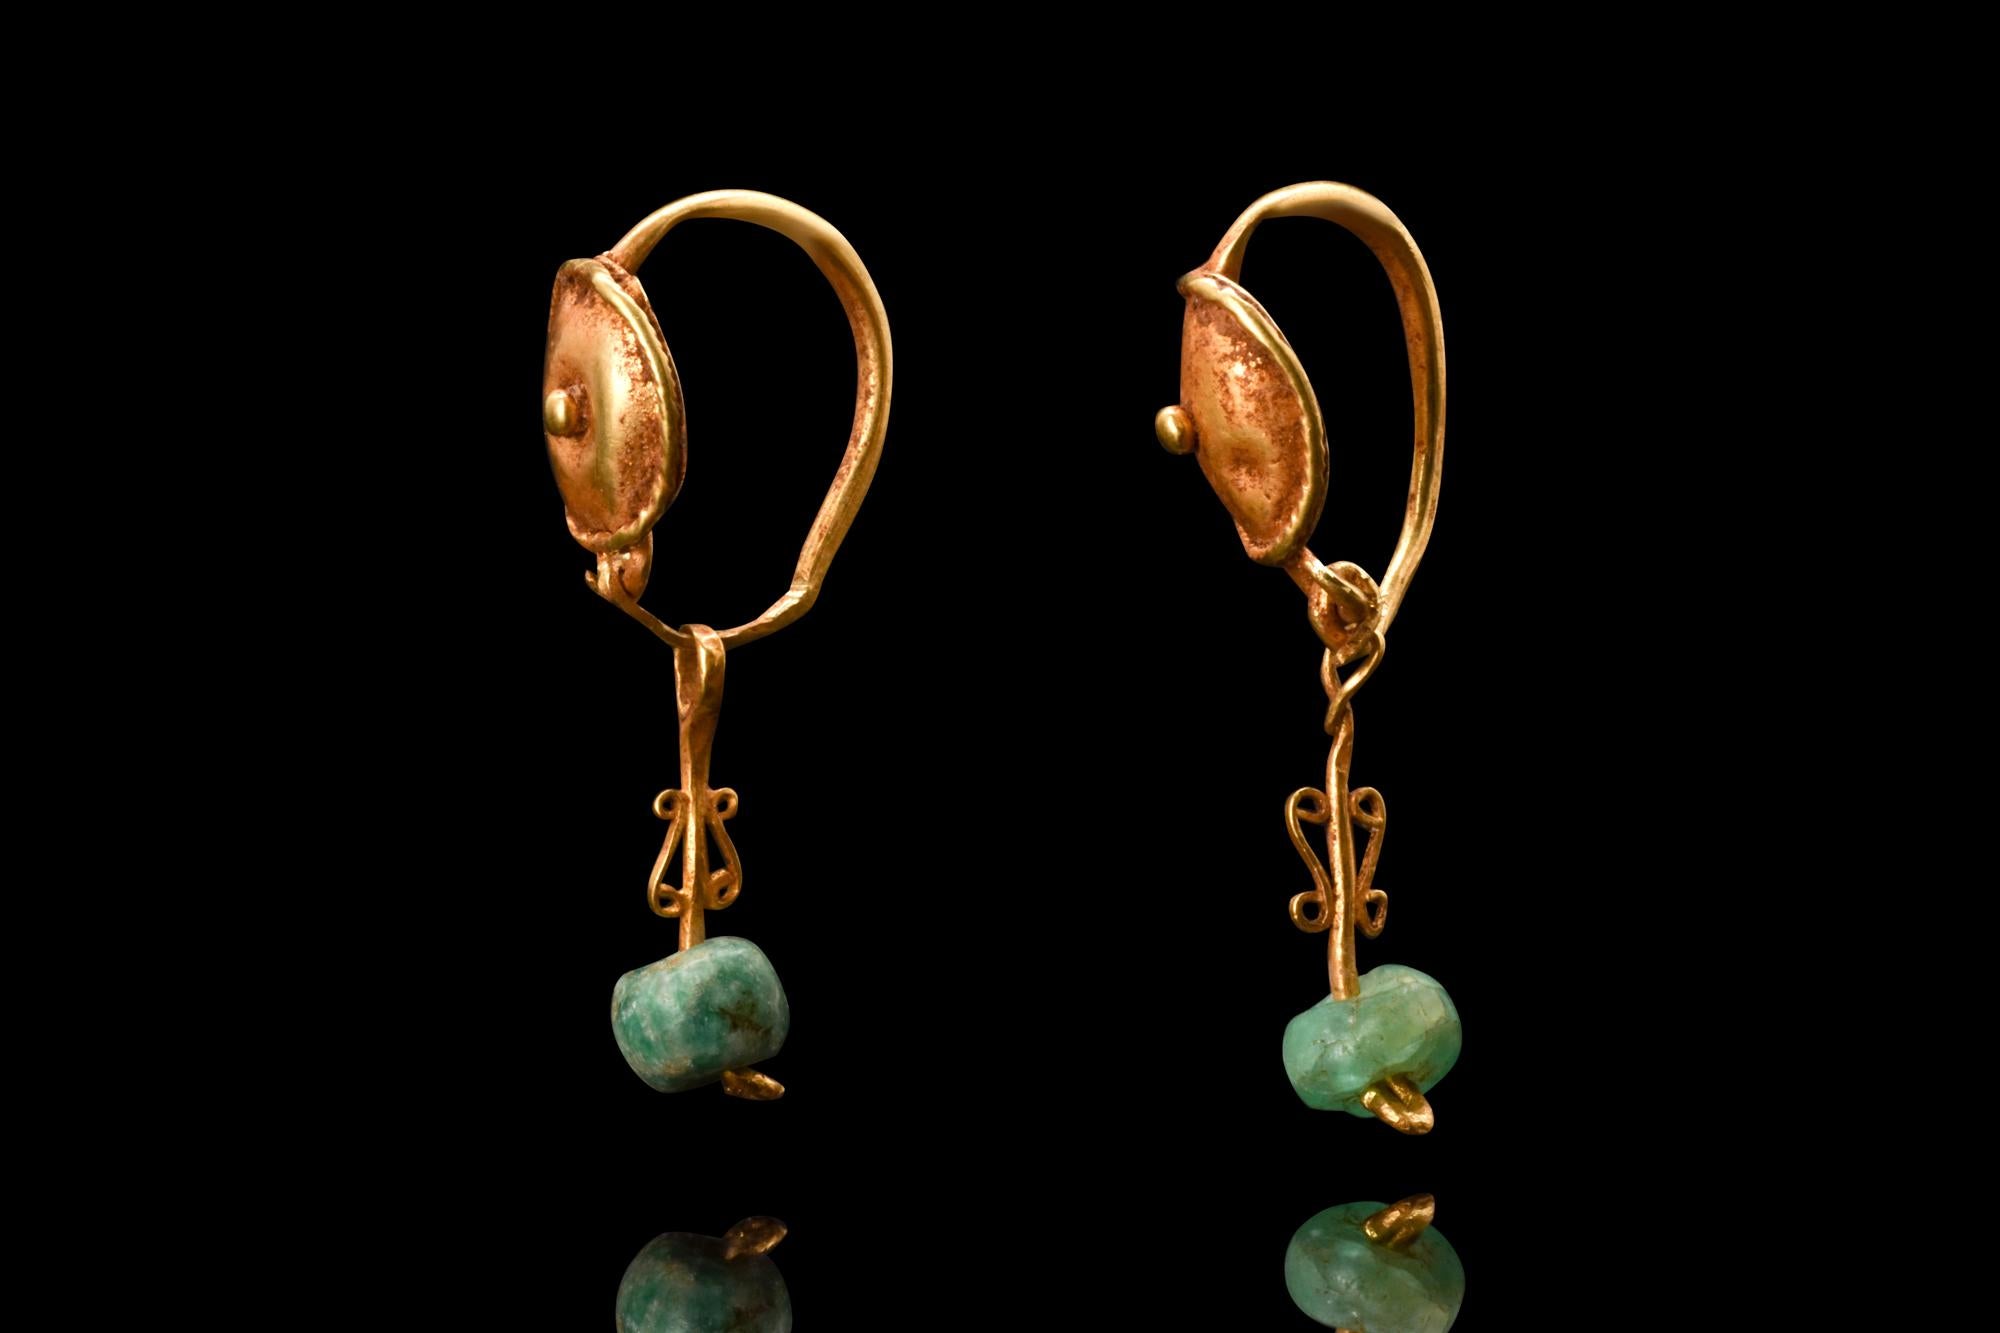 A lovely pair of Roman gold earrings comprised of a delicate hoop, secured with a hook and eye closure, and adorned with a boss shield. The shield features a twisted border and a central granule, adding a refined touch to the earrings' overall